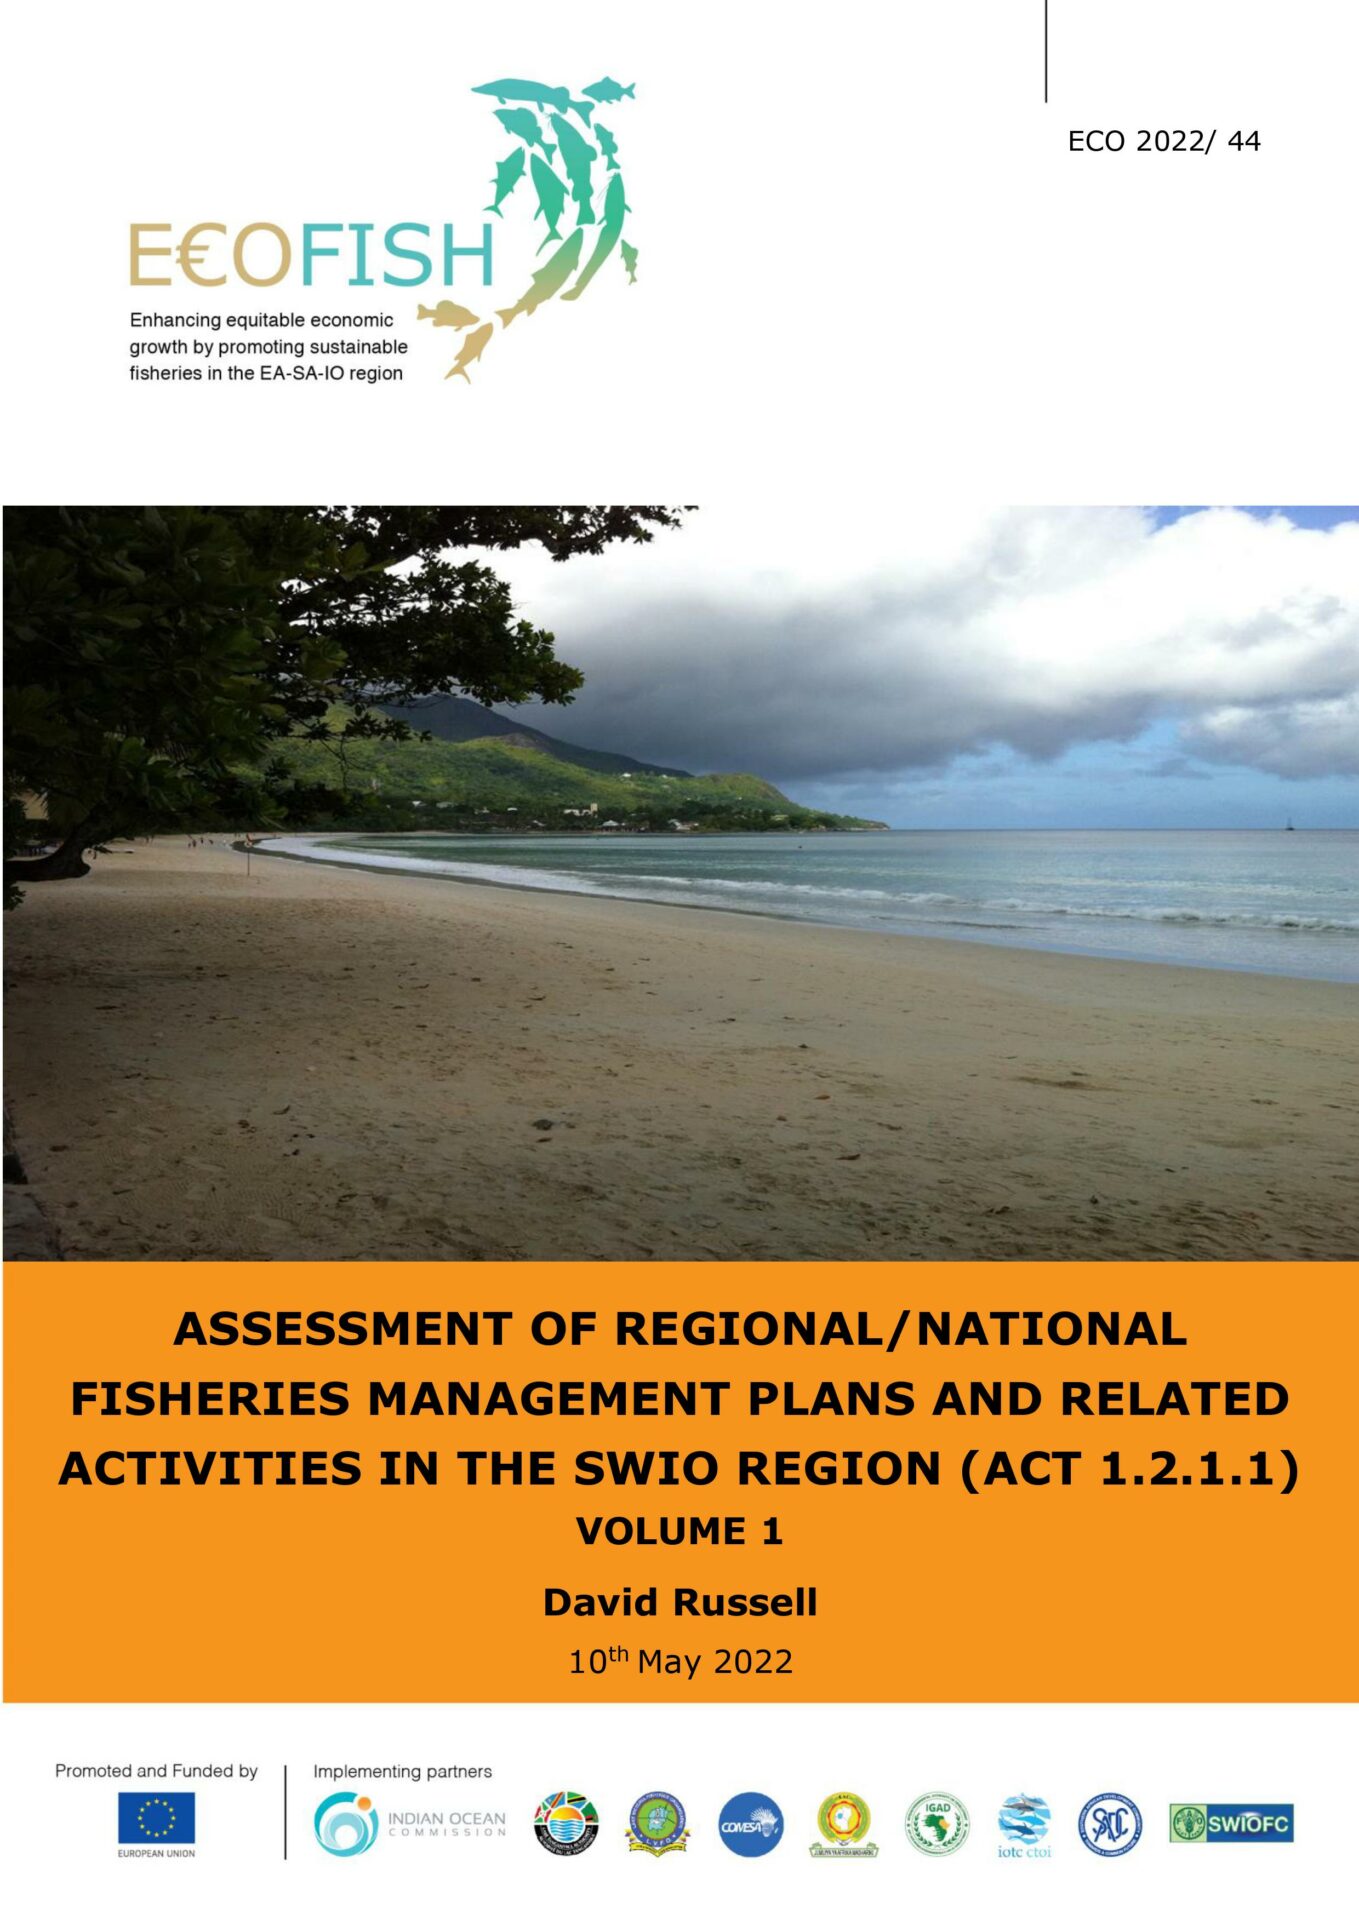 ASSESSMENT OF REGIONALNATIONAL FISHERIES MANAGEMENT PLANS AND RELATED ACTIVITIES IN THE SWIO REGION